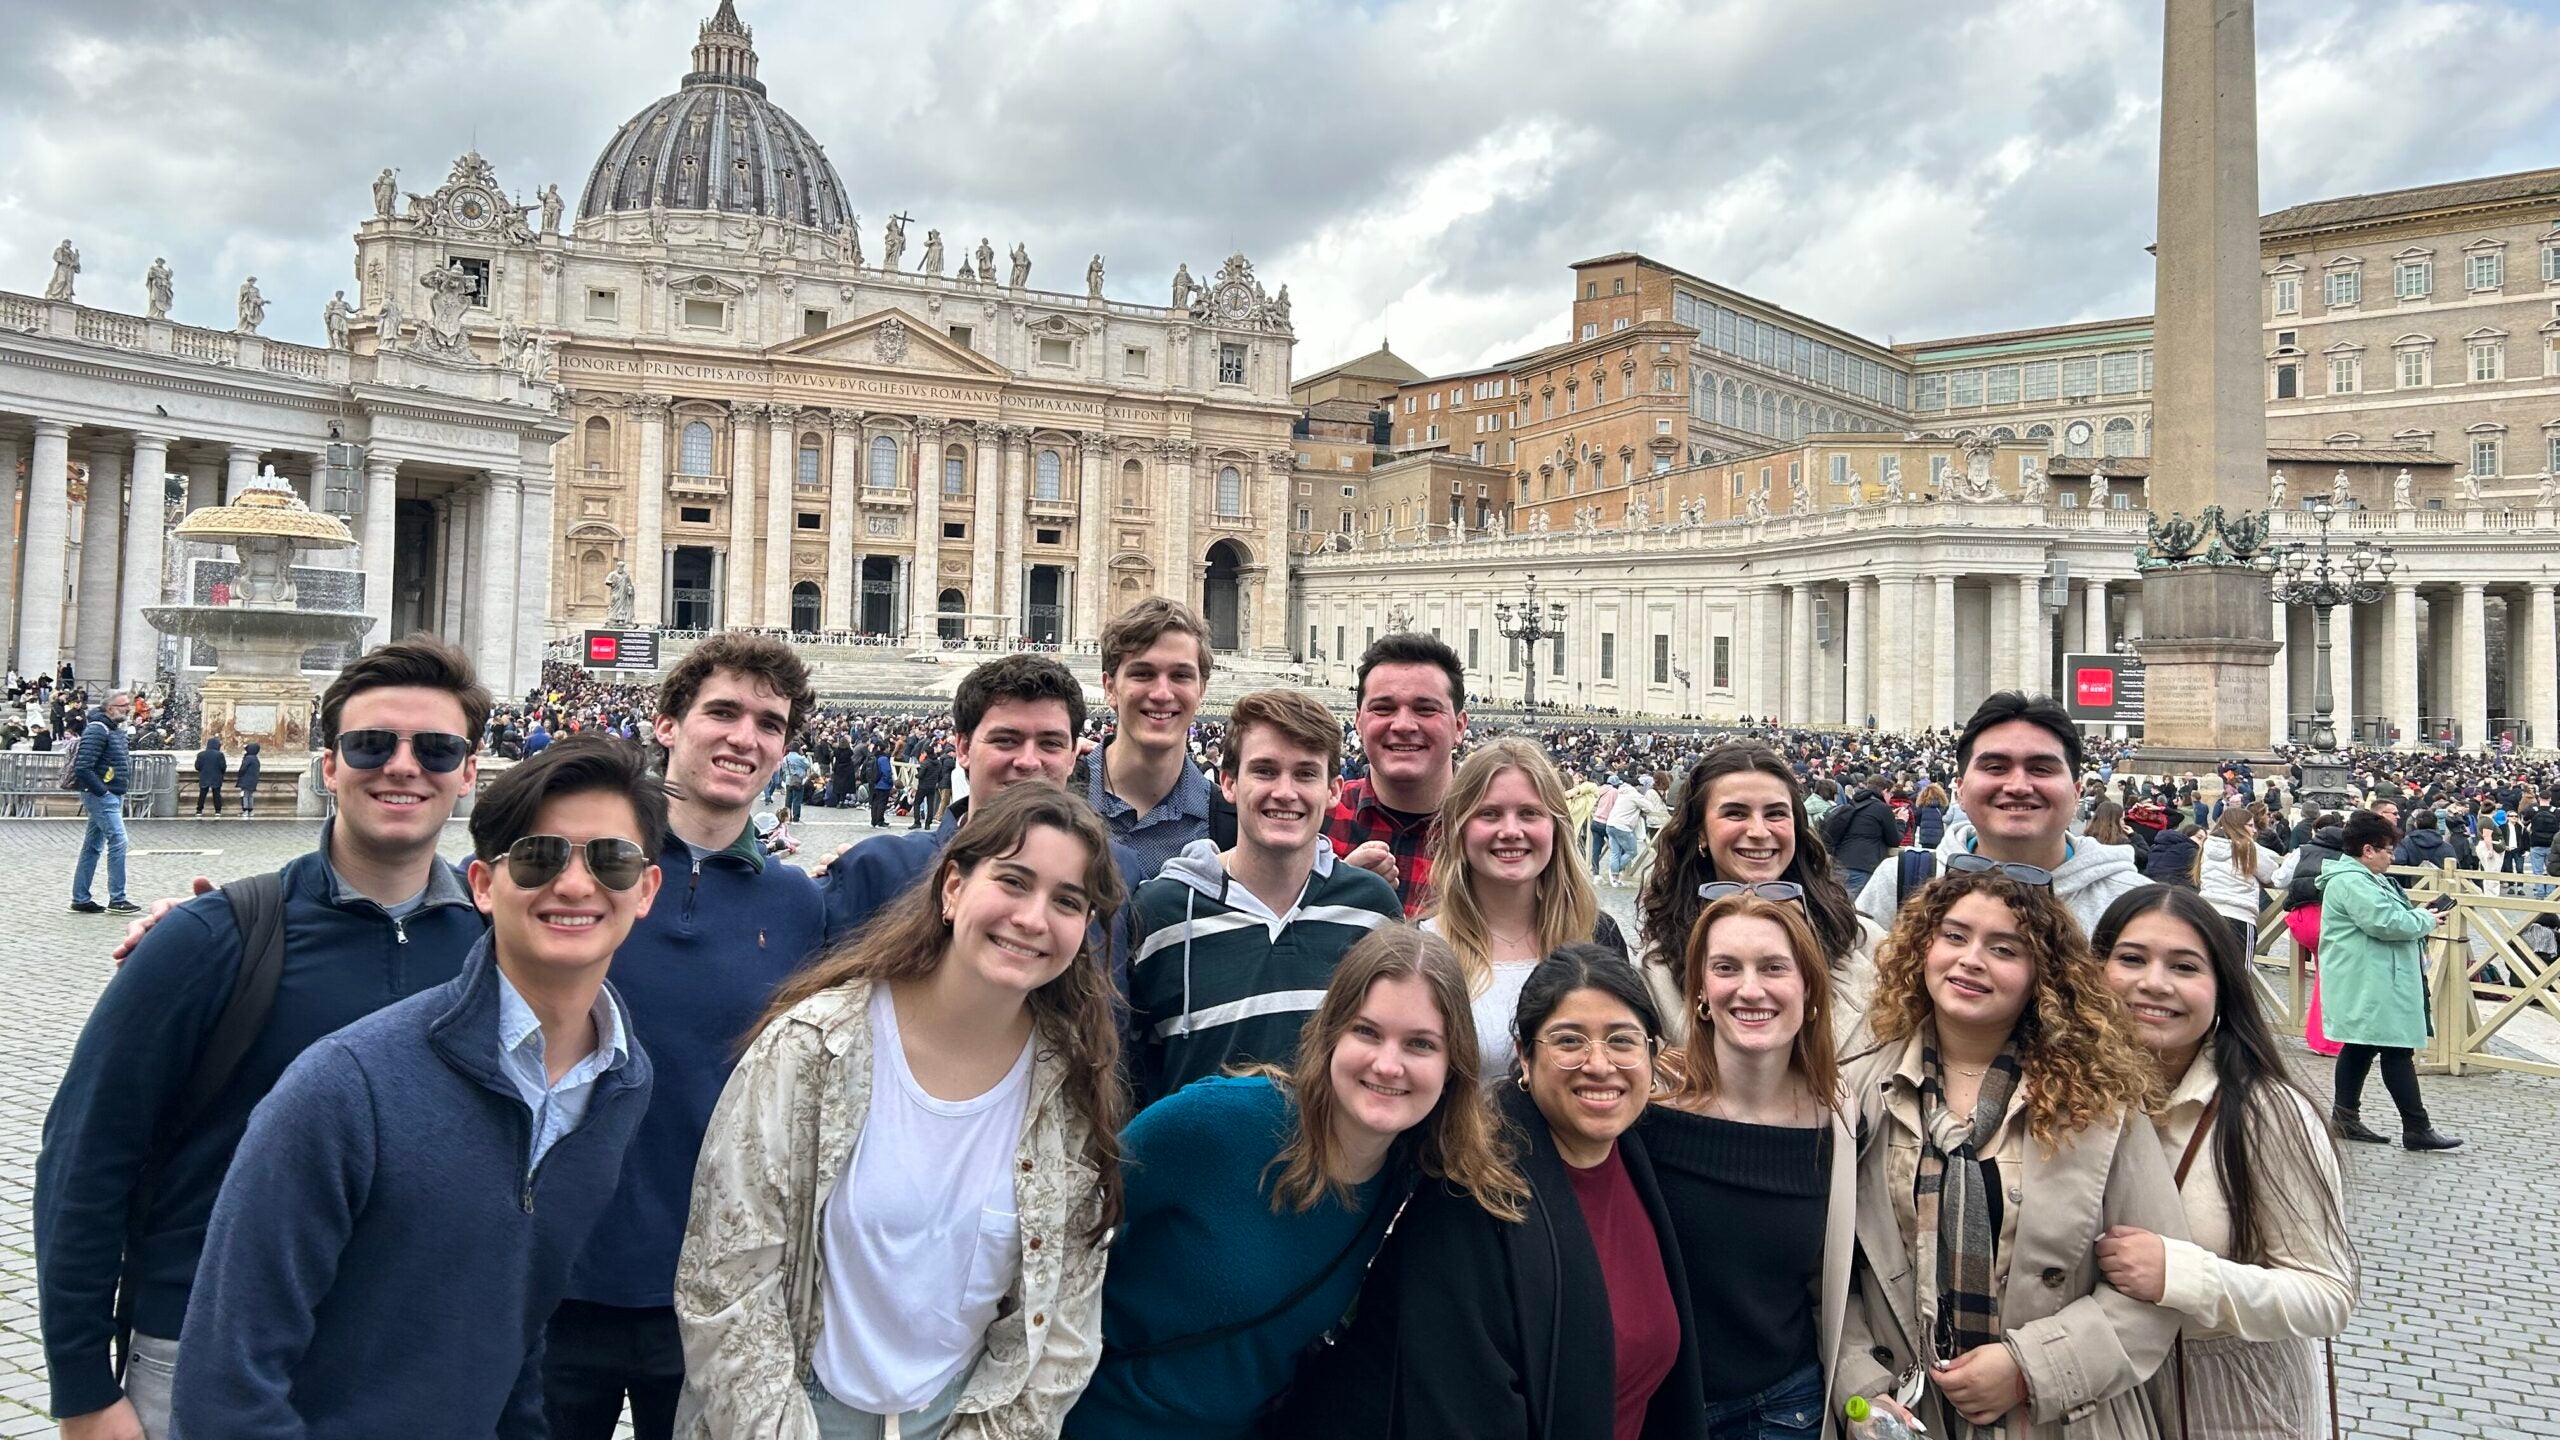 A group of students standing in St Peter's Square, Vatican City with Saint Peter's Basilica in the background.